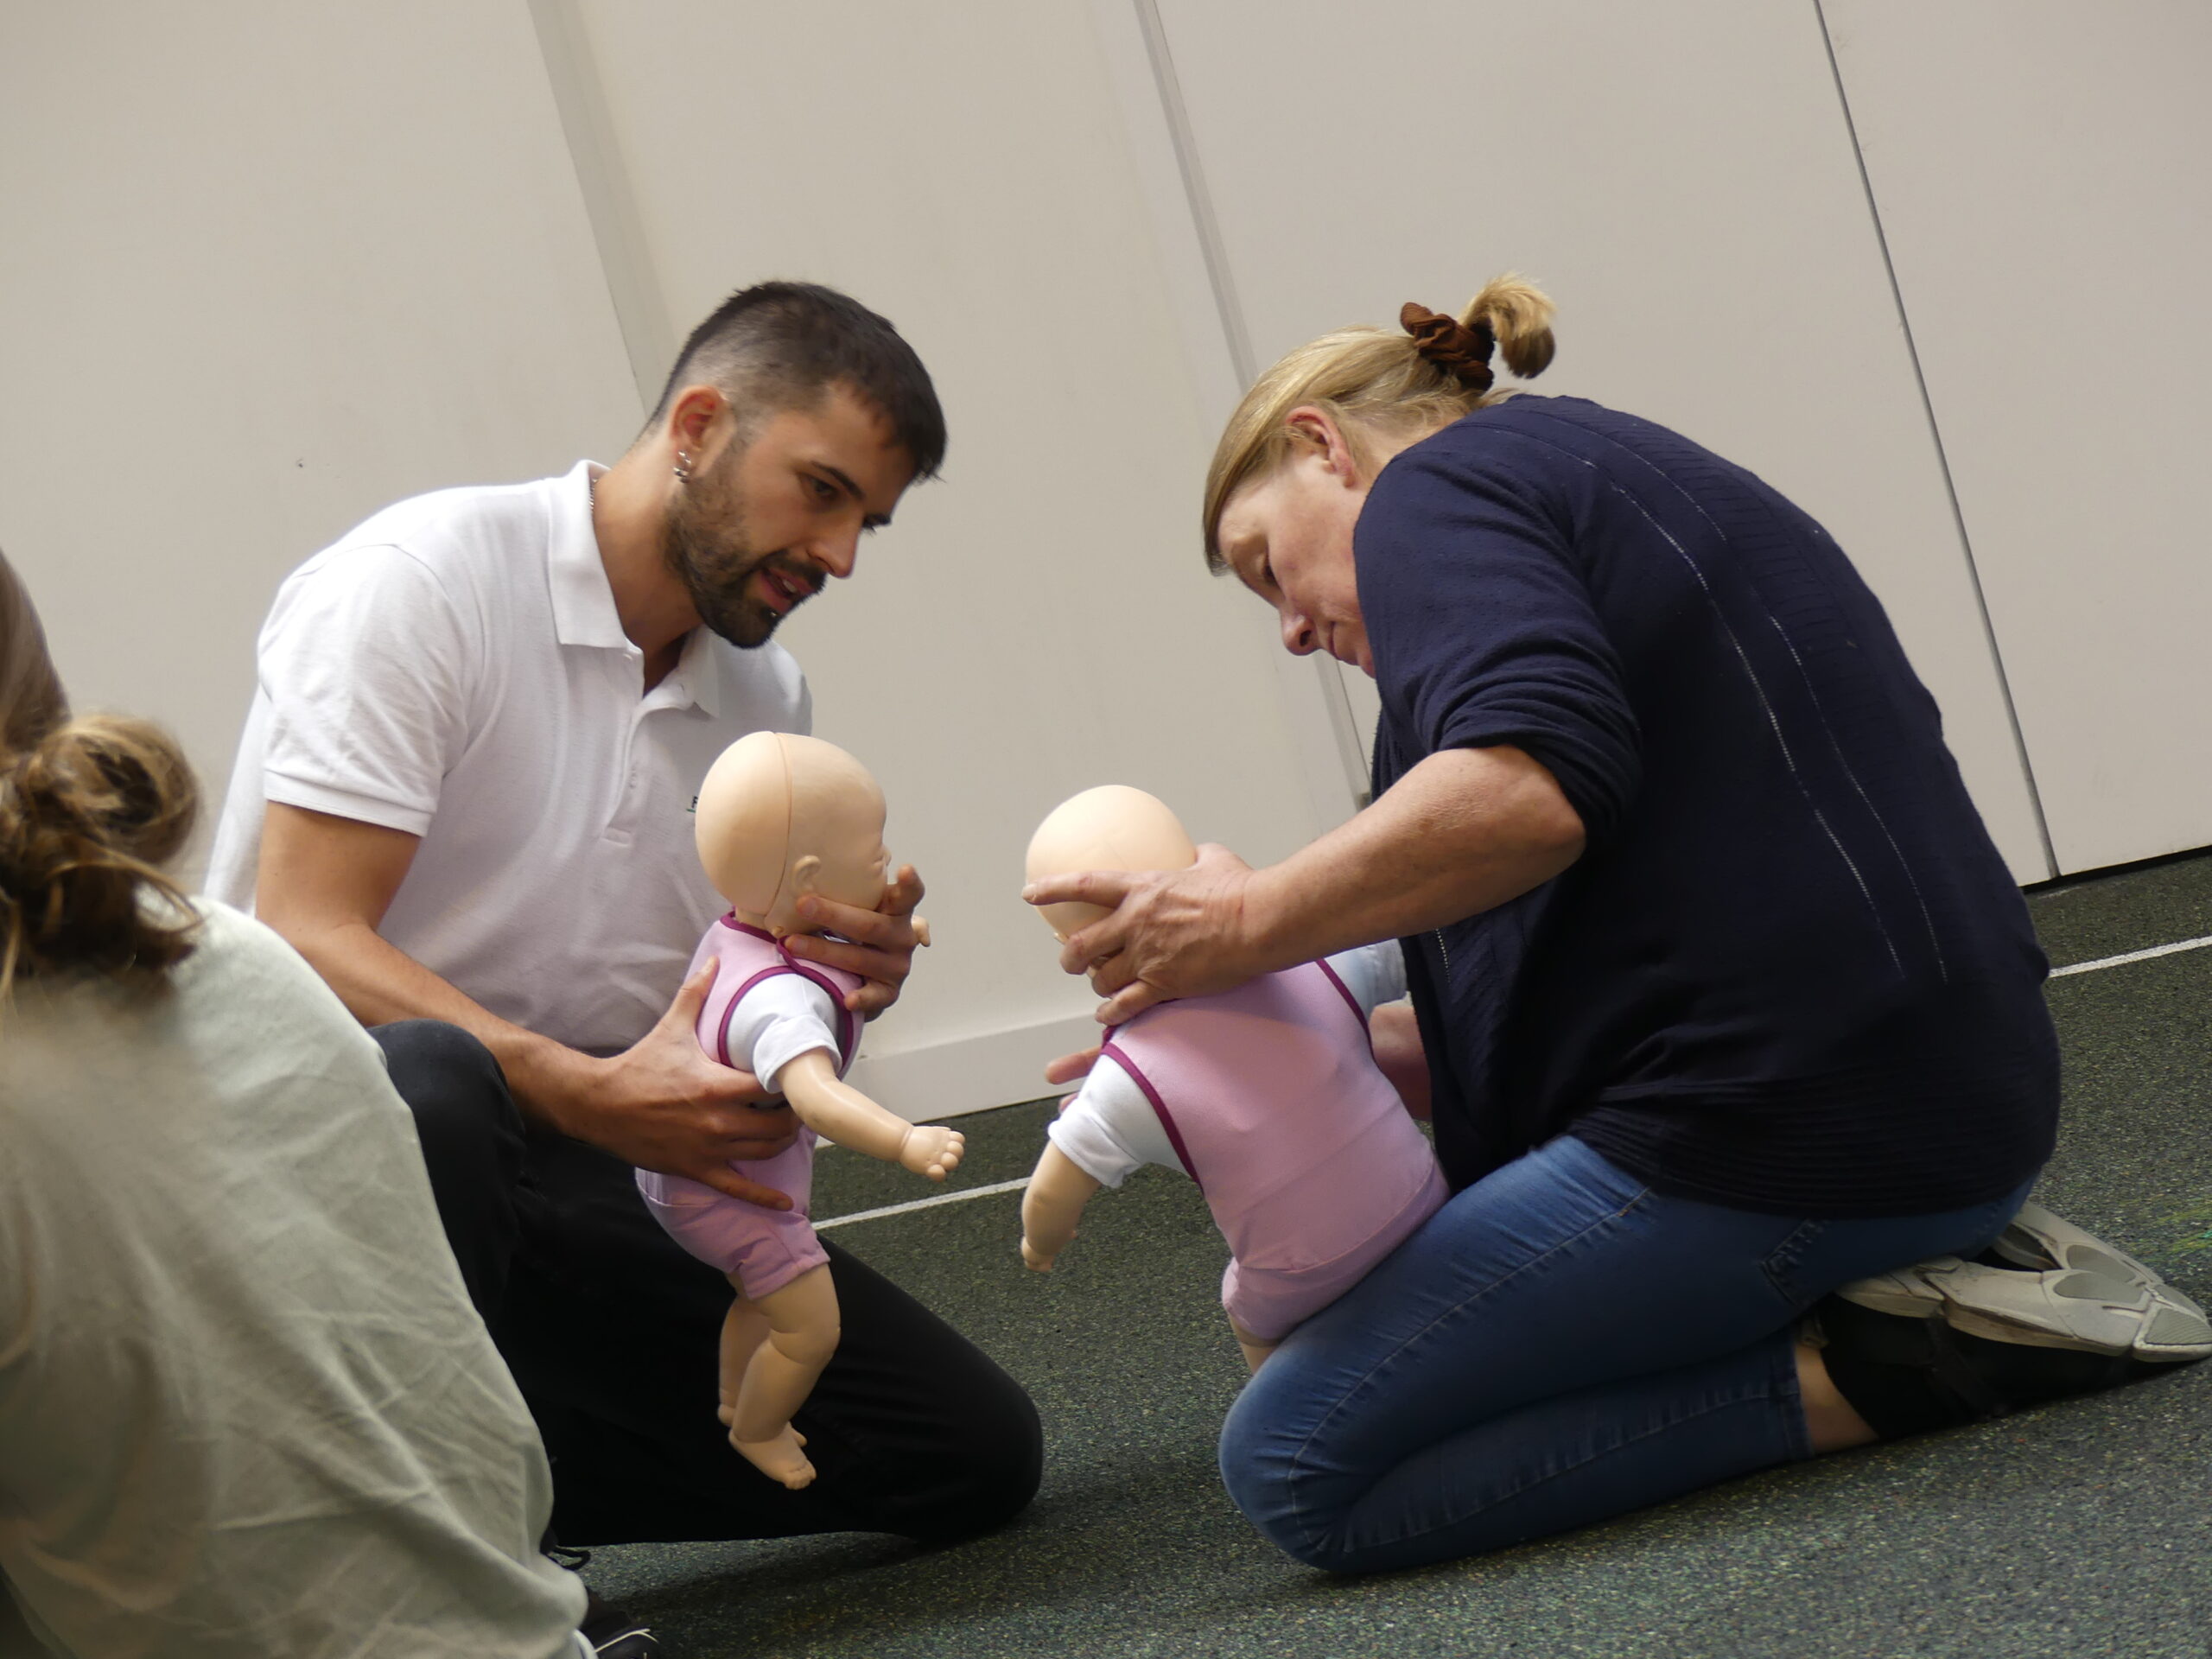 Frontline Training instructor coaching someone on airway management of an infant on a paediatric first aid course